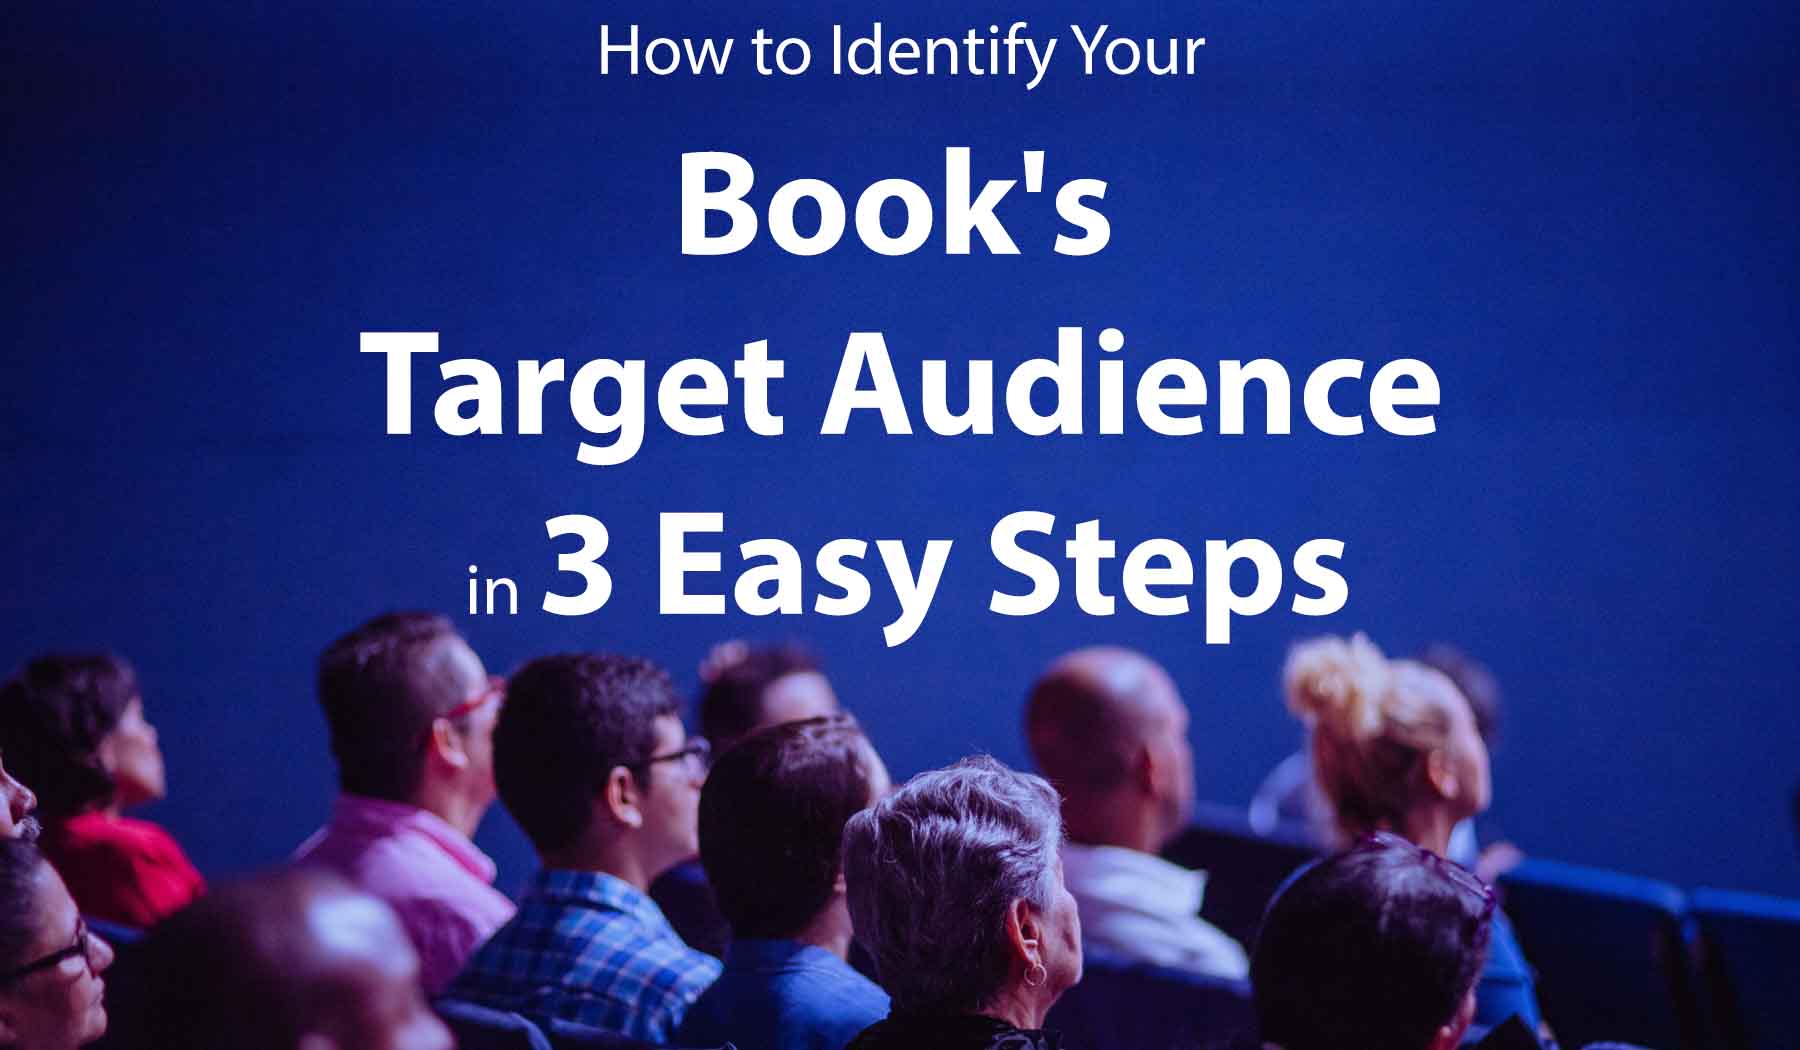 How to Identify Your Book's Target Audience